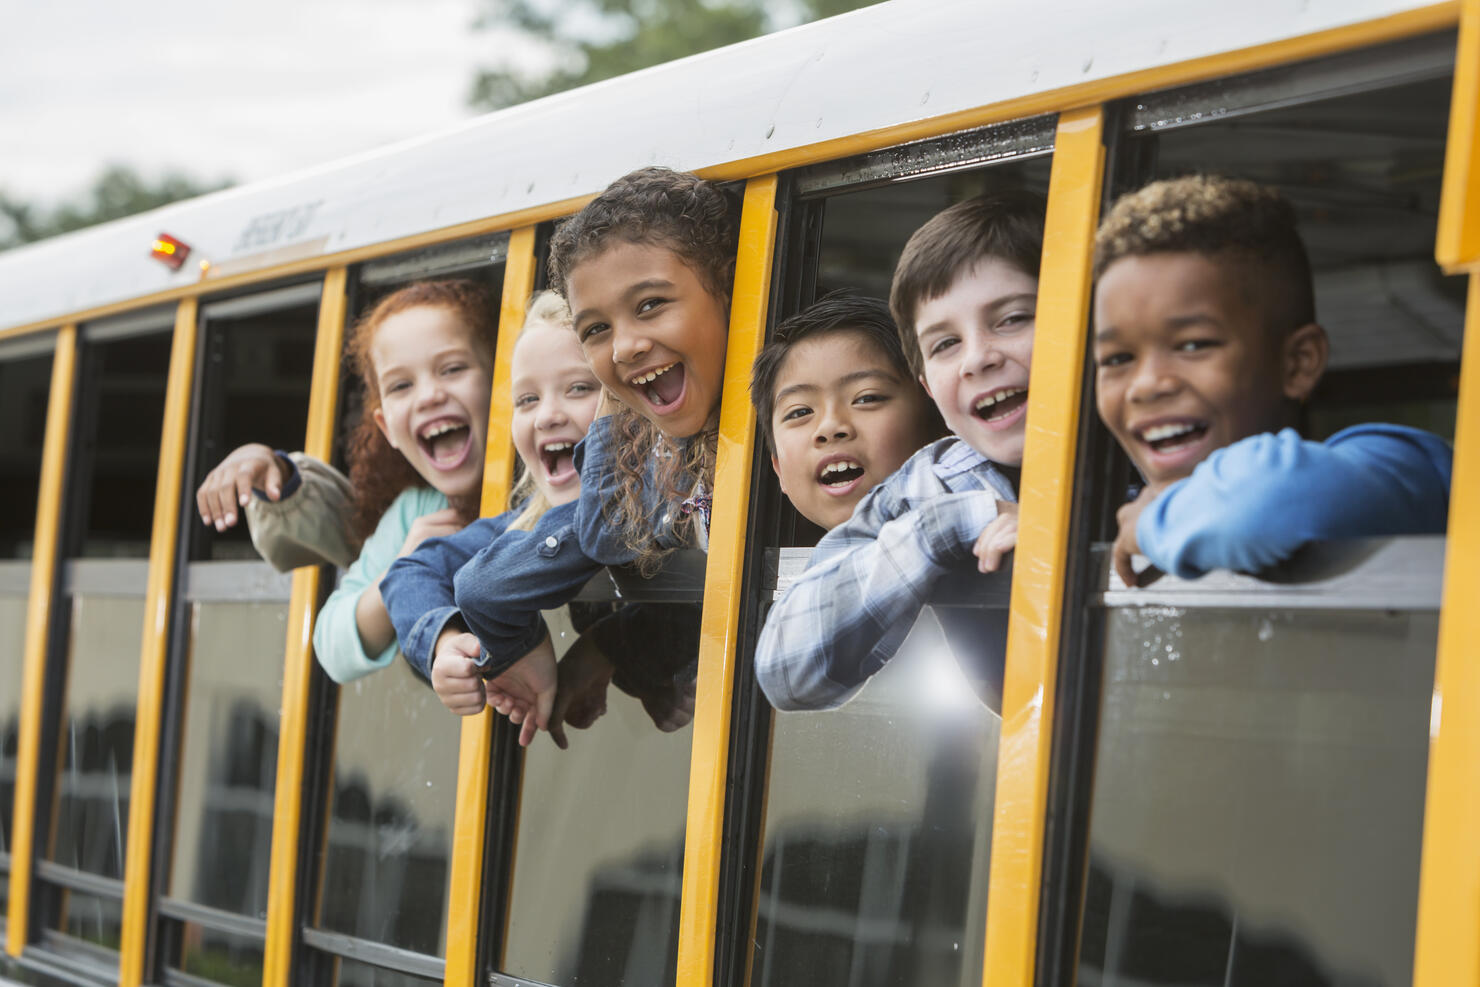 Elementary school children looking out window of bus